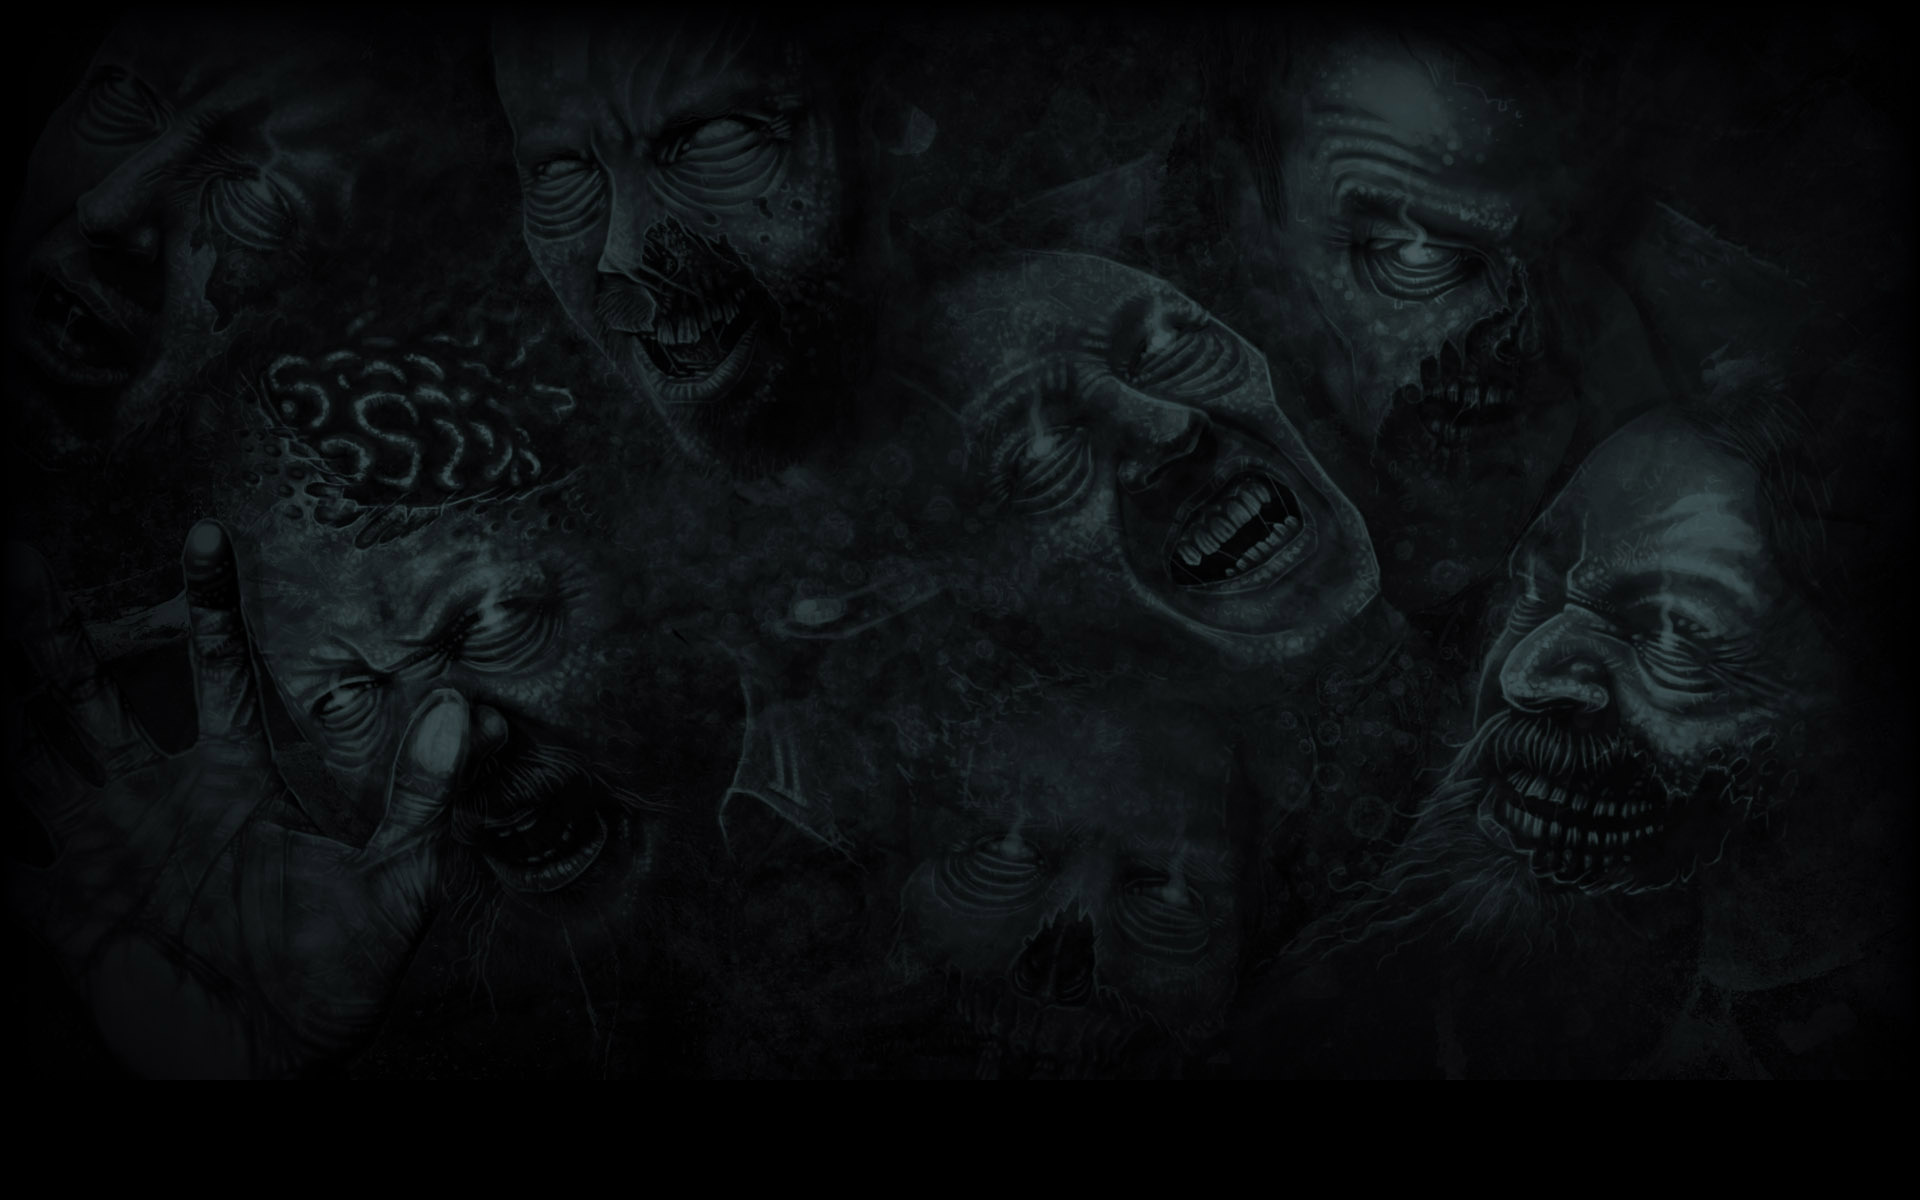 Zombie backgrounds collection, Steam profile design, Custom display, Unique imagery, 1920x1200 HD Desktop